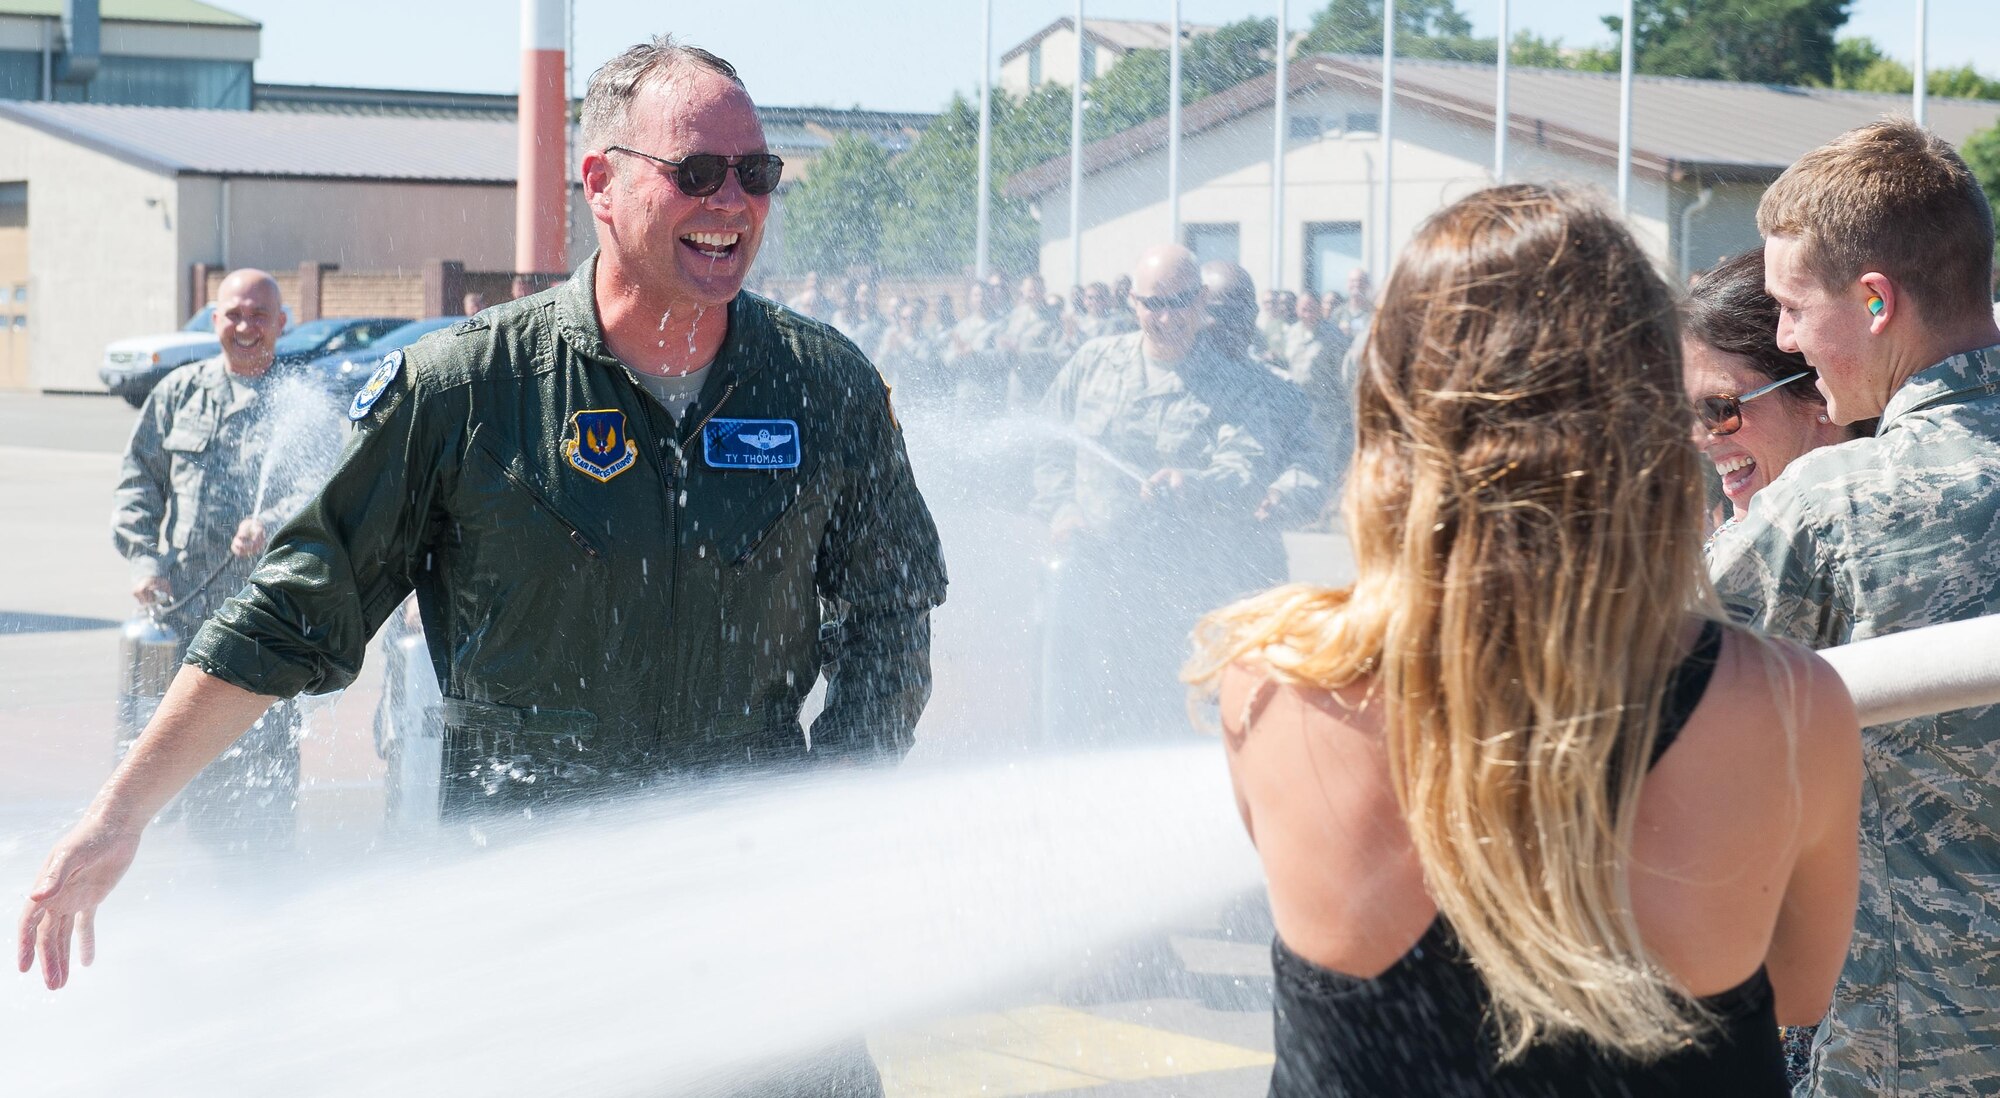 Brig. Gen. Jon T. Thomas, 86th Airlift Wing commander, approaches his family as he gets hosed down with water during his “fini flight” July 20, 2016, at Ramstein Air Base, Germany. Fini flights have been a tradition for pilots that are changing bases since World War II. The pilots fly their assigned aircraft one last time, and are greeted by Airmen, family and friends after landing. (U.S. Air force photo/Airman 1st Class Lane T. Plummer)